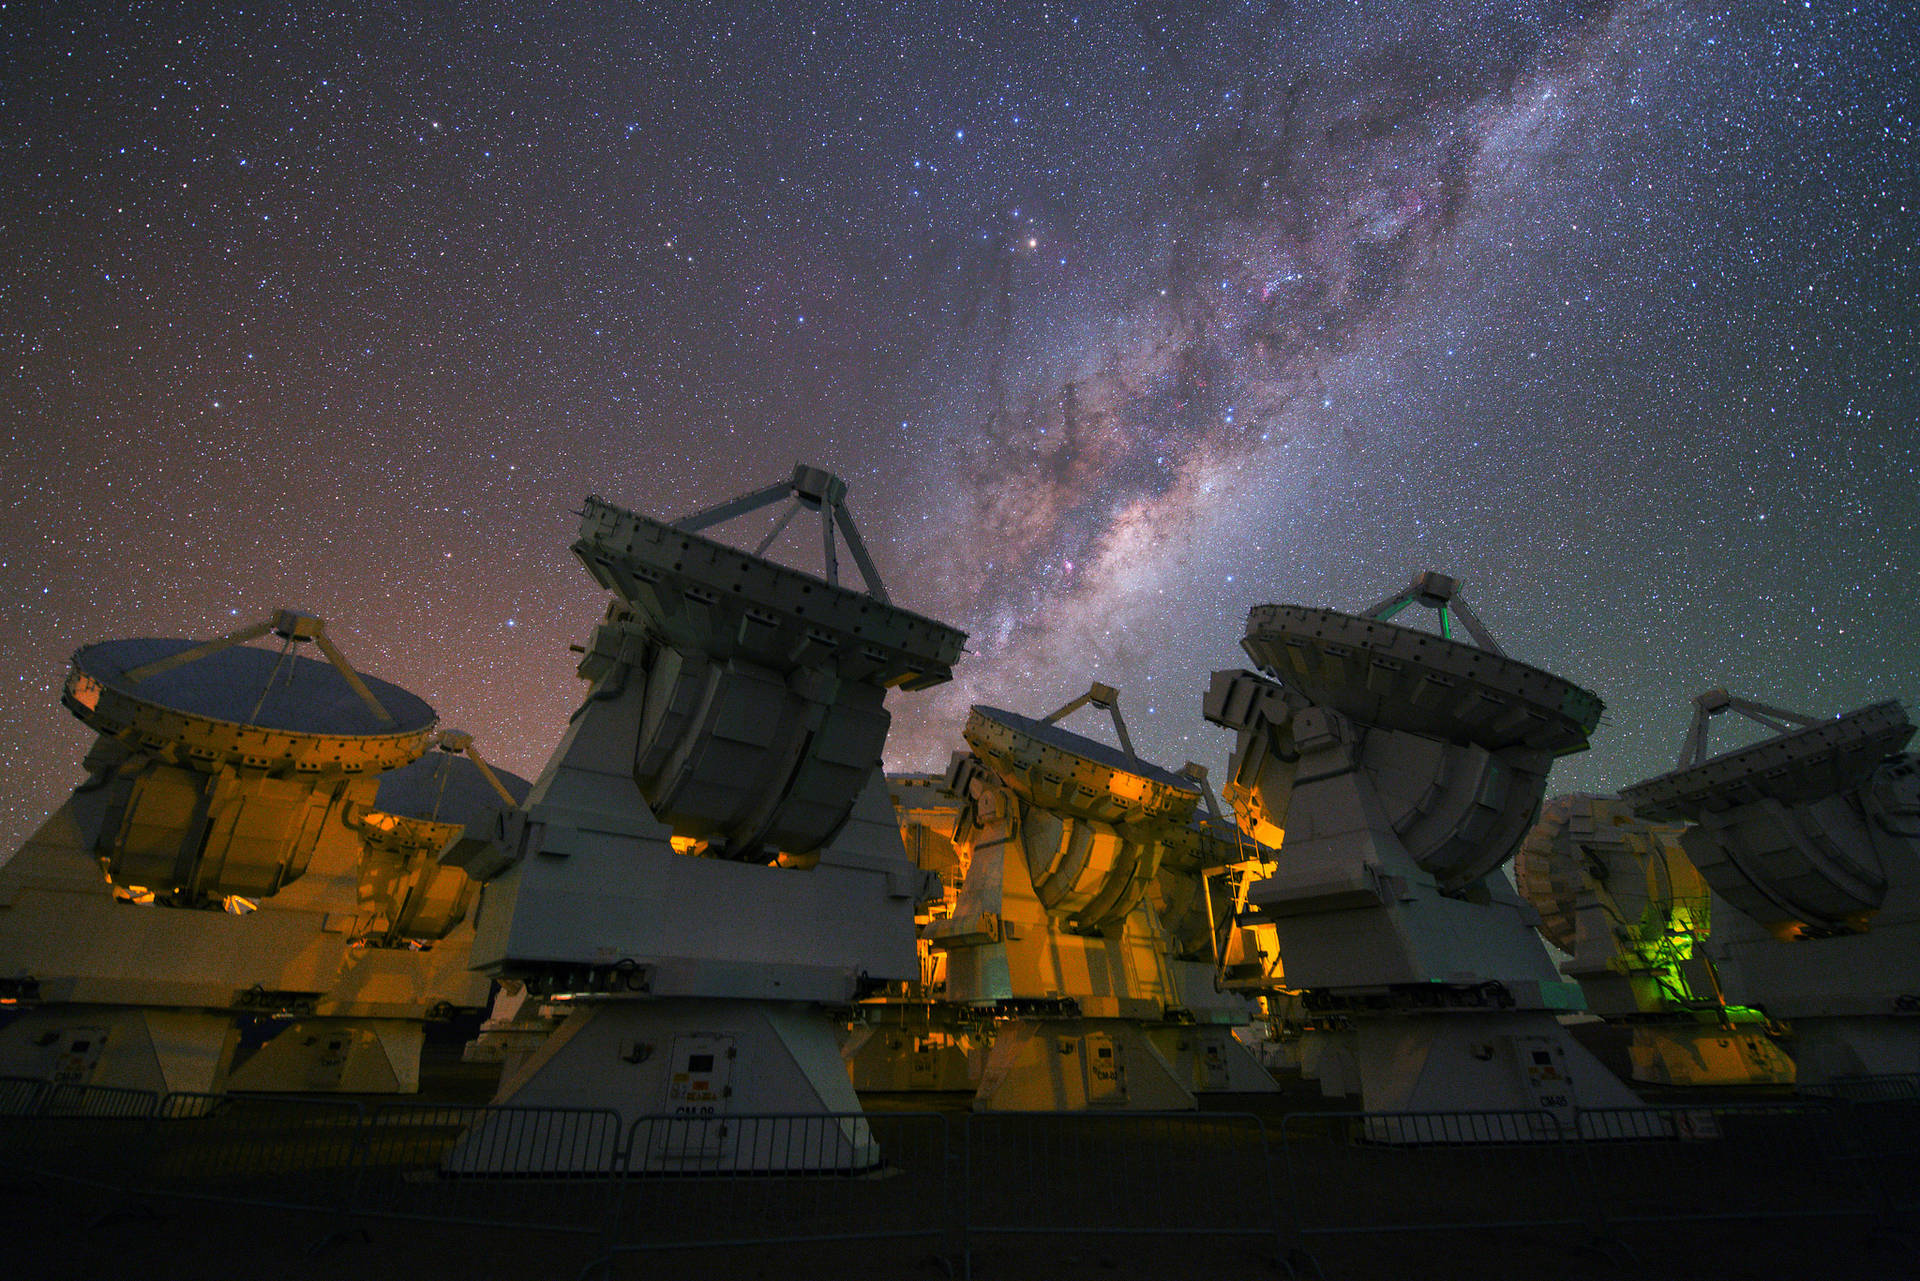 The ALMA Radio Telescope Scanning the Celestial Sphere in Chile Wallpaper